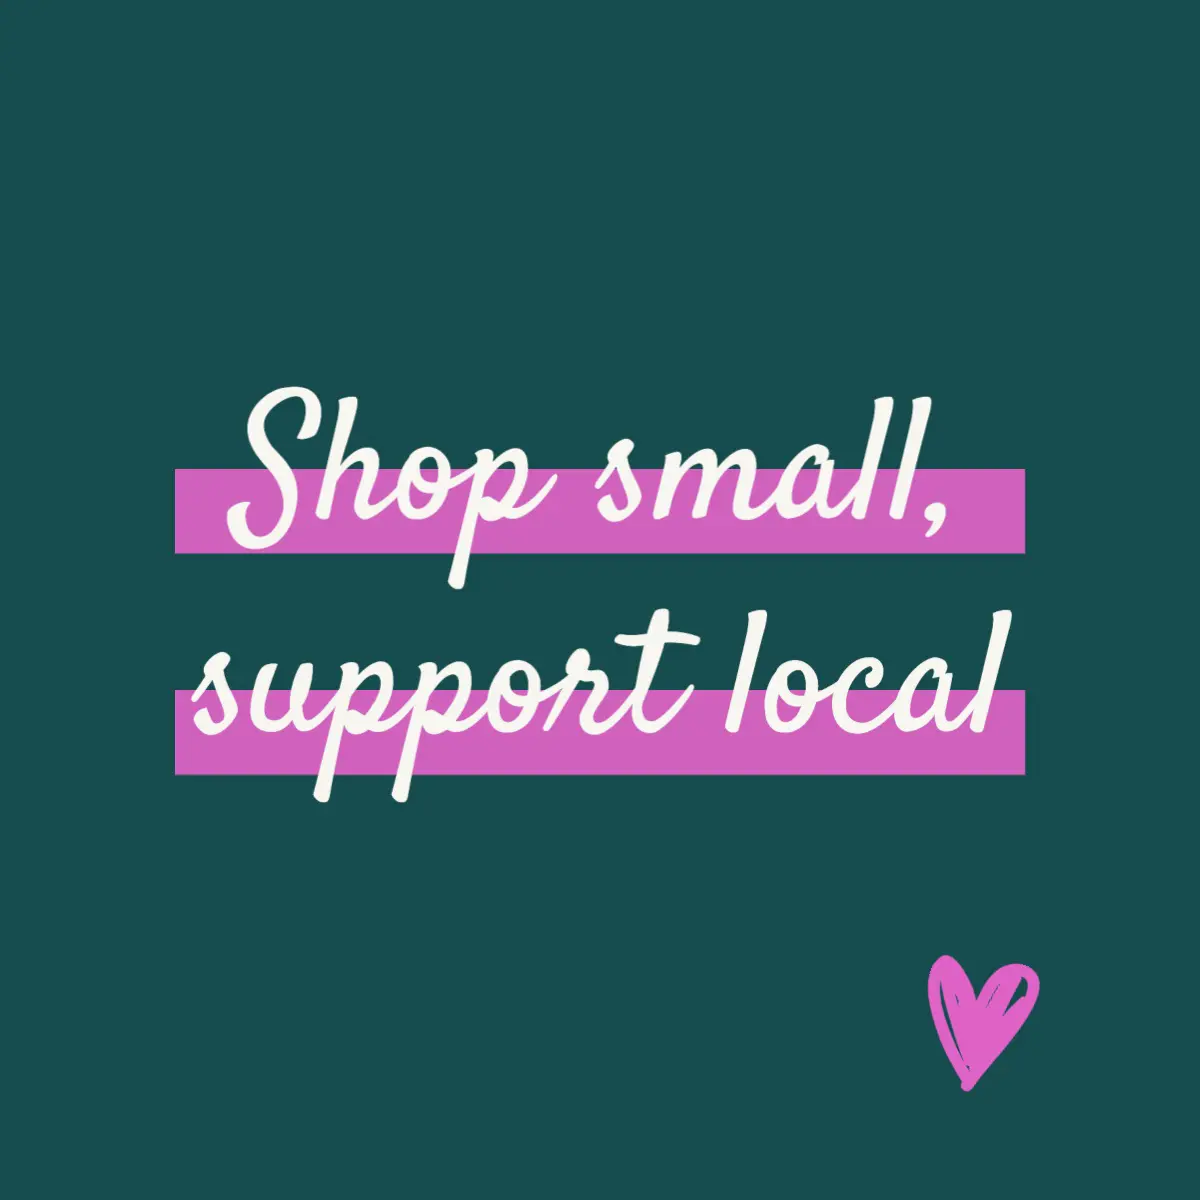 Shop small, support local 